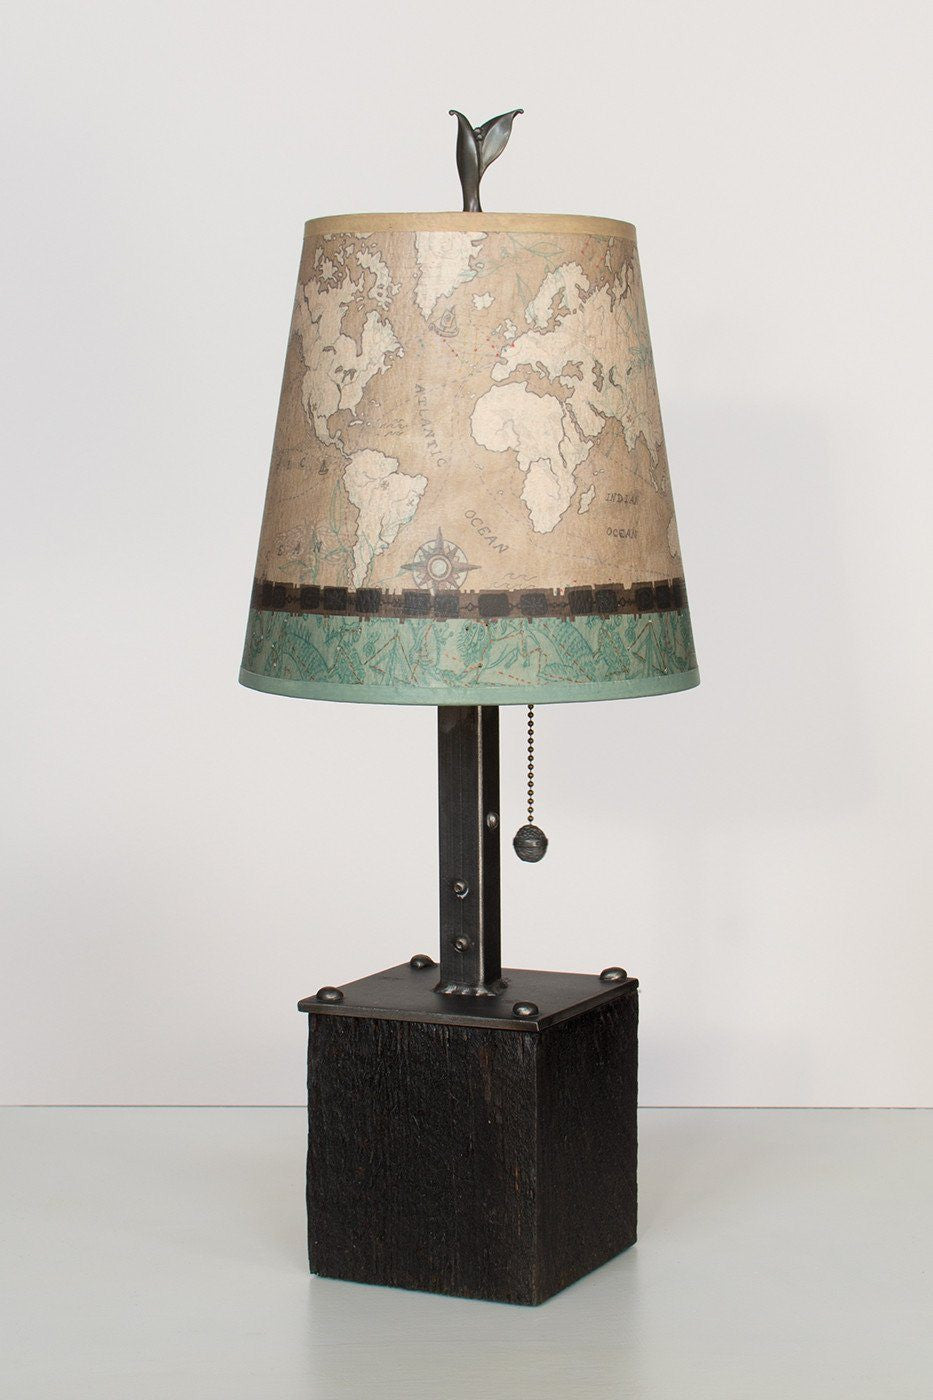 Steel Table Lamp on Reclaimed Wood with Small Drum Shade in Sand Map Lit